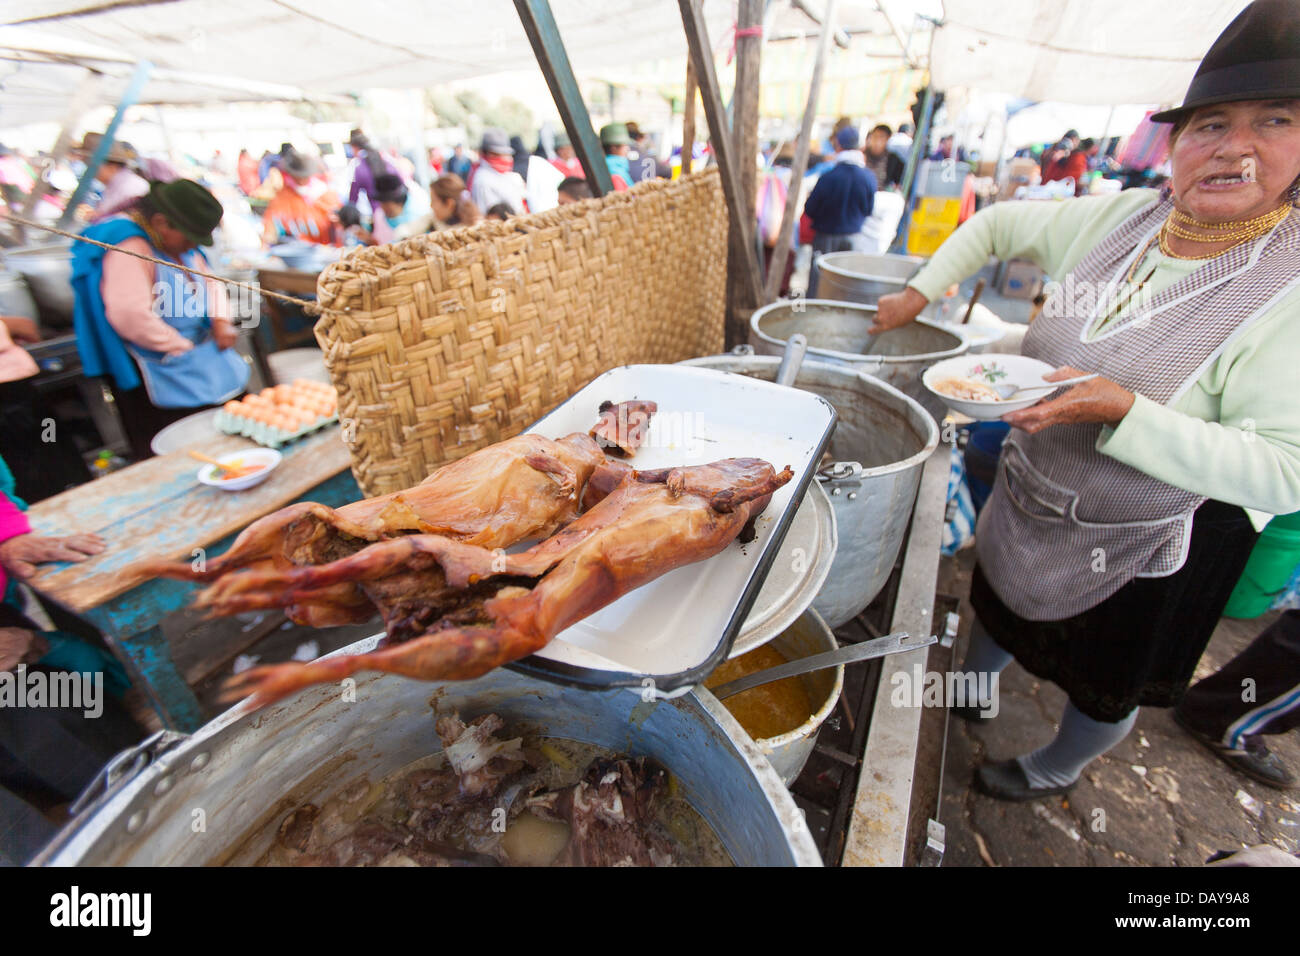 Guinea pig or Cuy are prepared to eat at the colorful weekly market in Zimbahua, Stock Photo